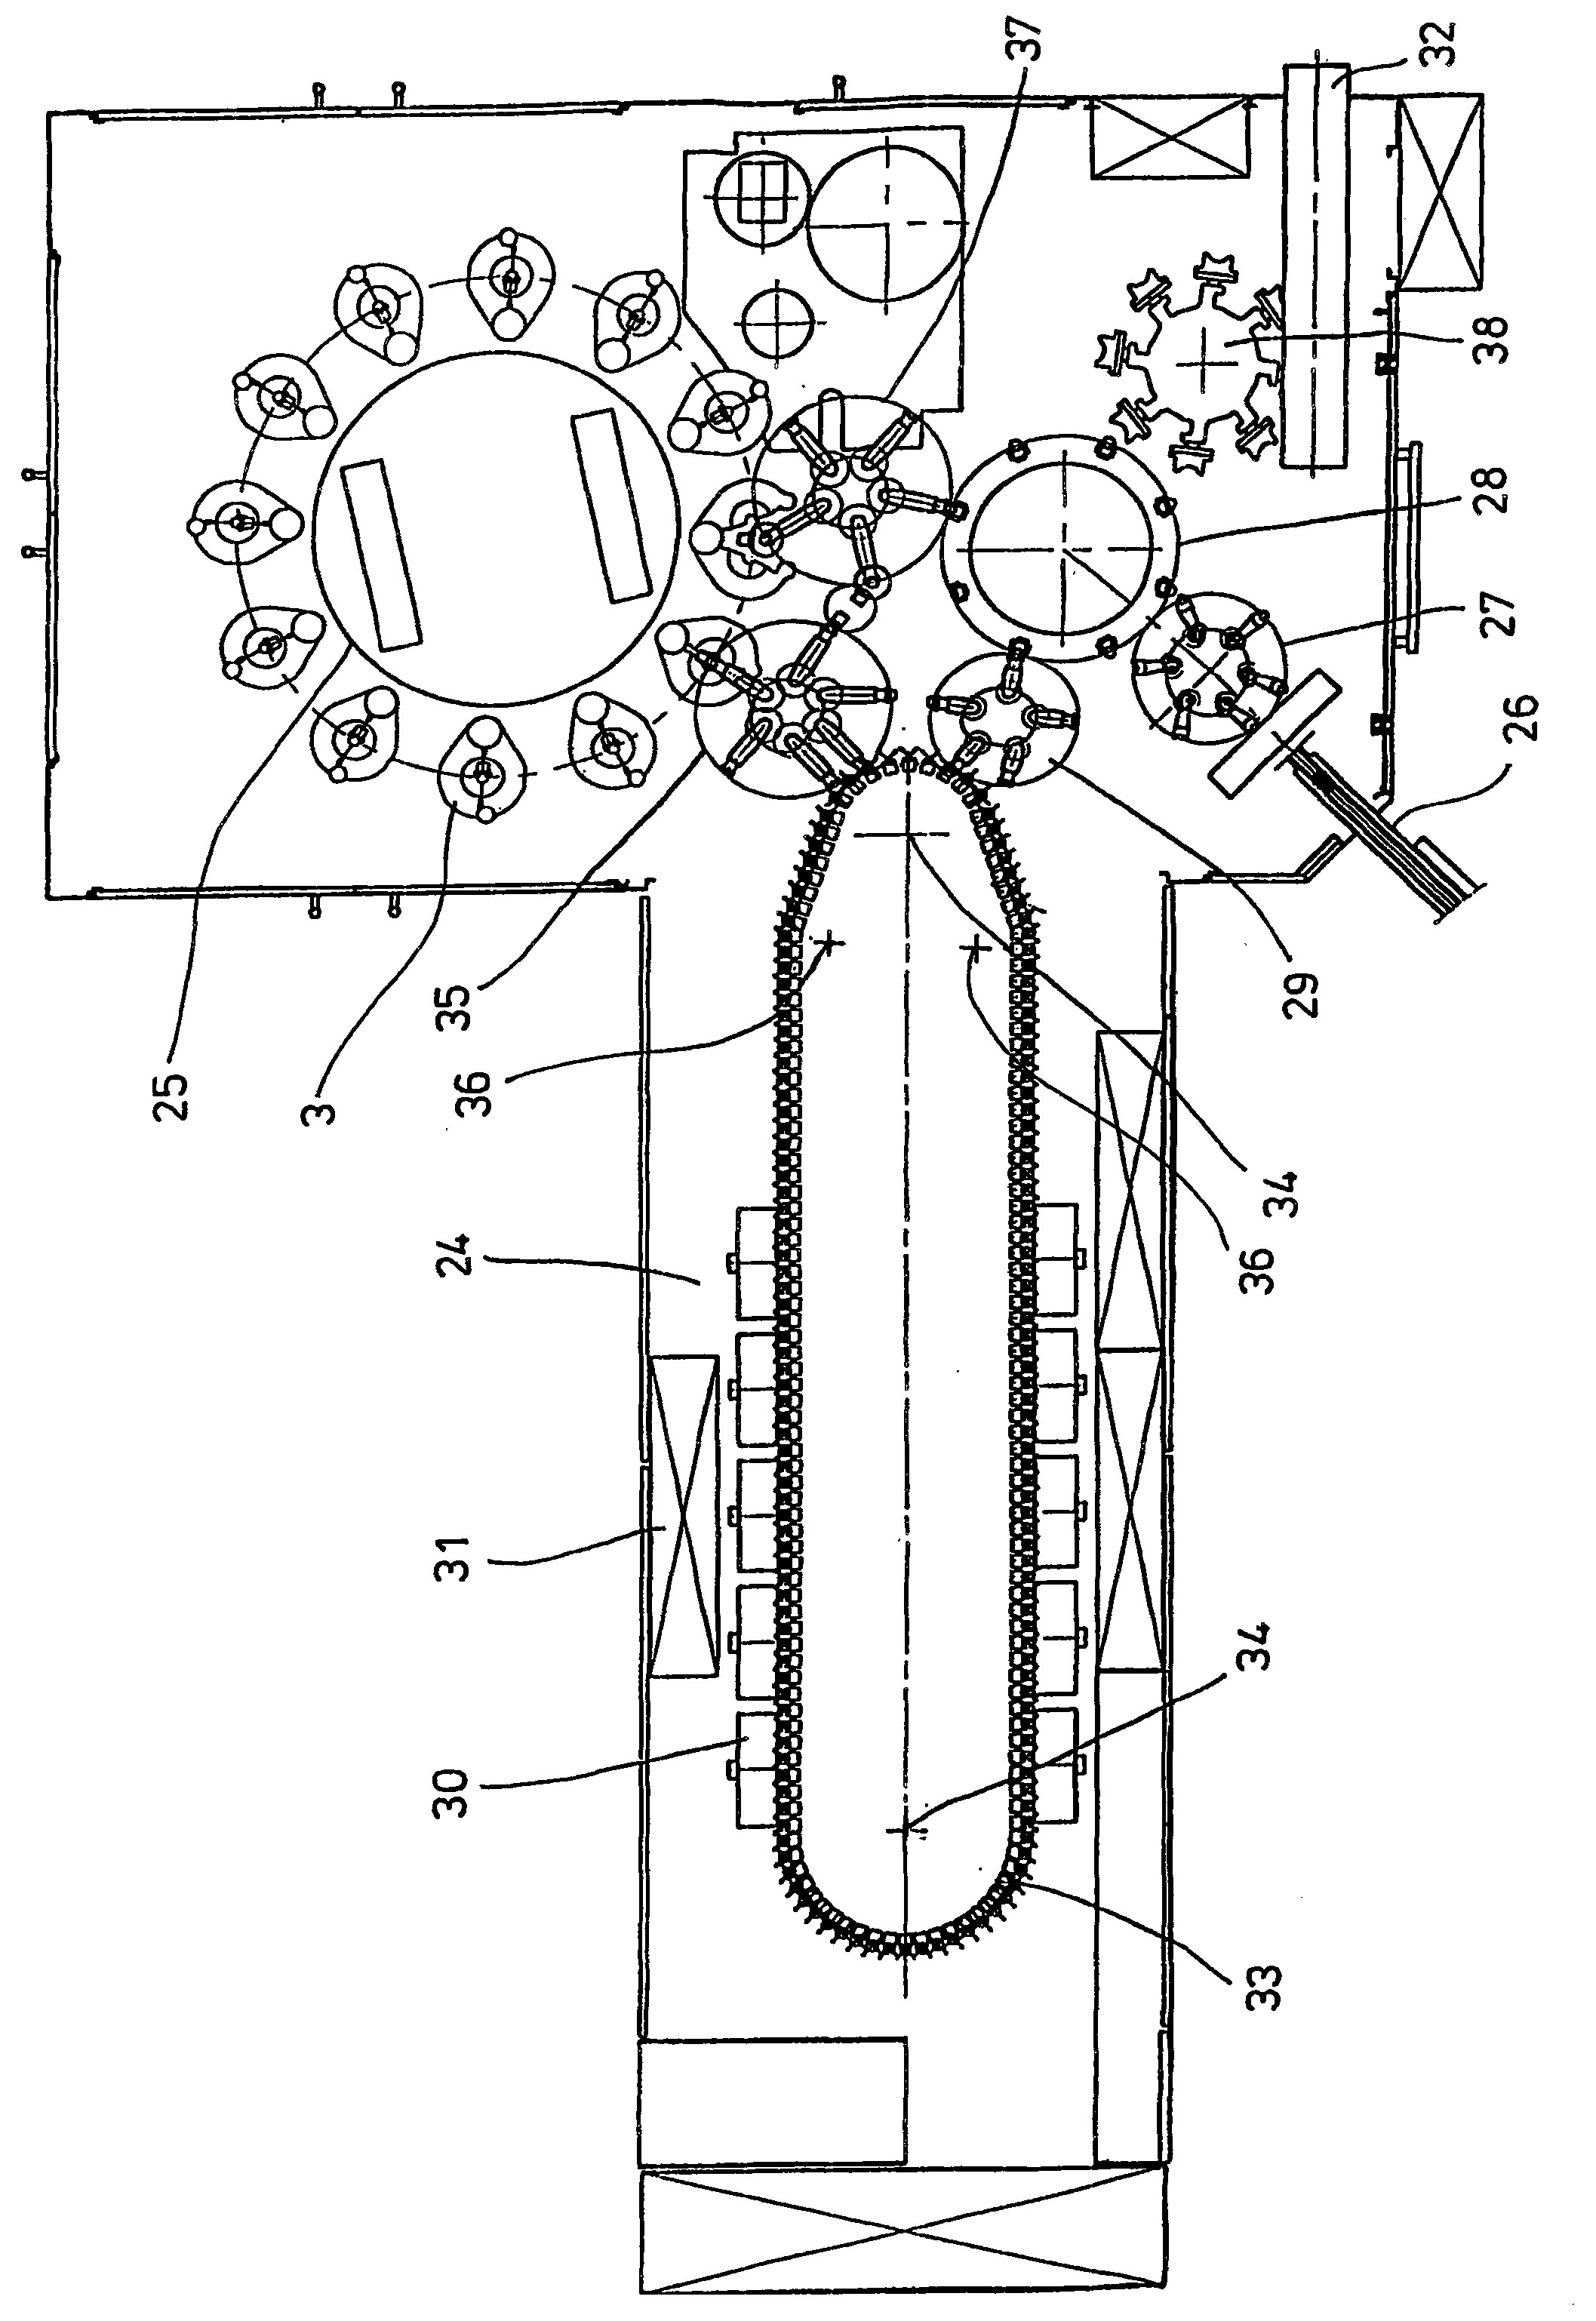 Device for blow-moulding containers